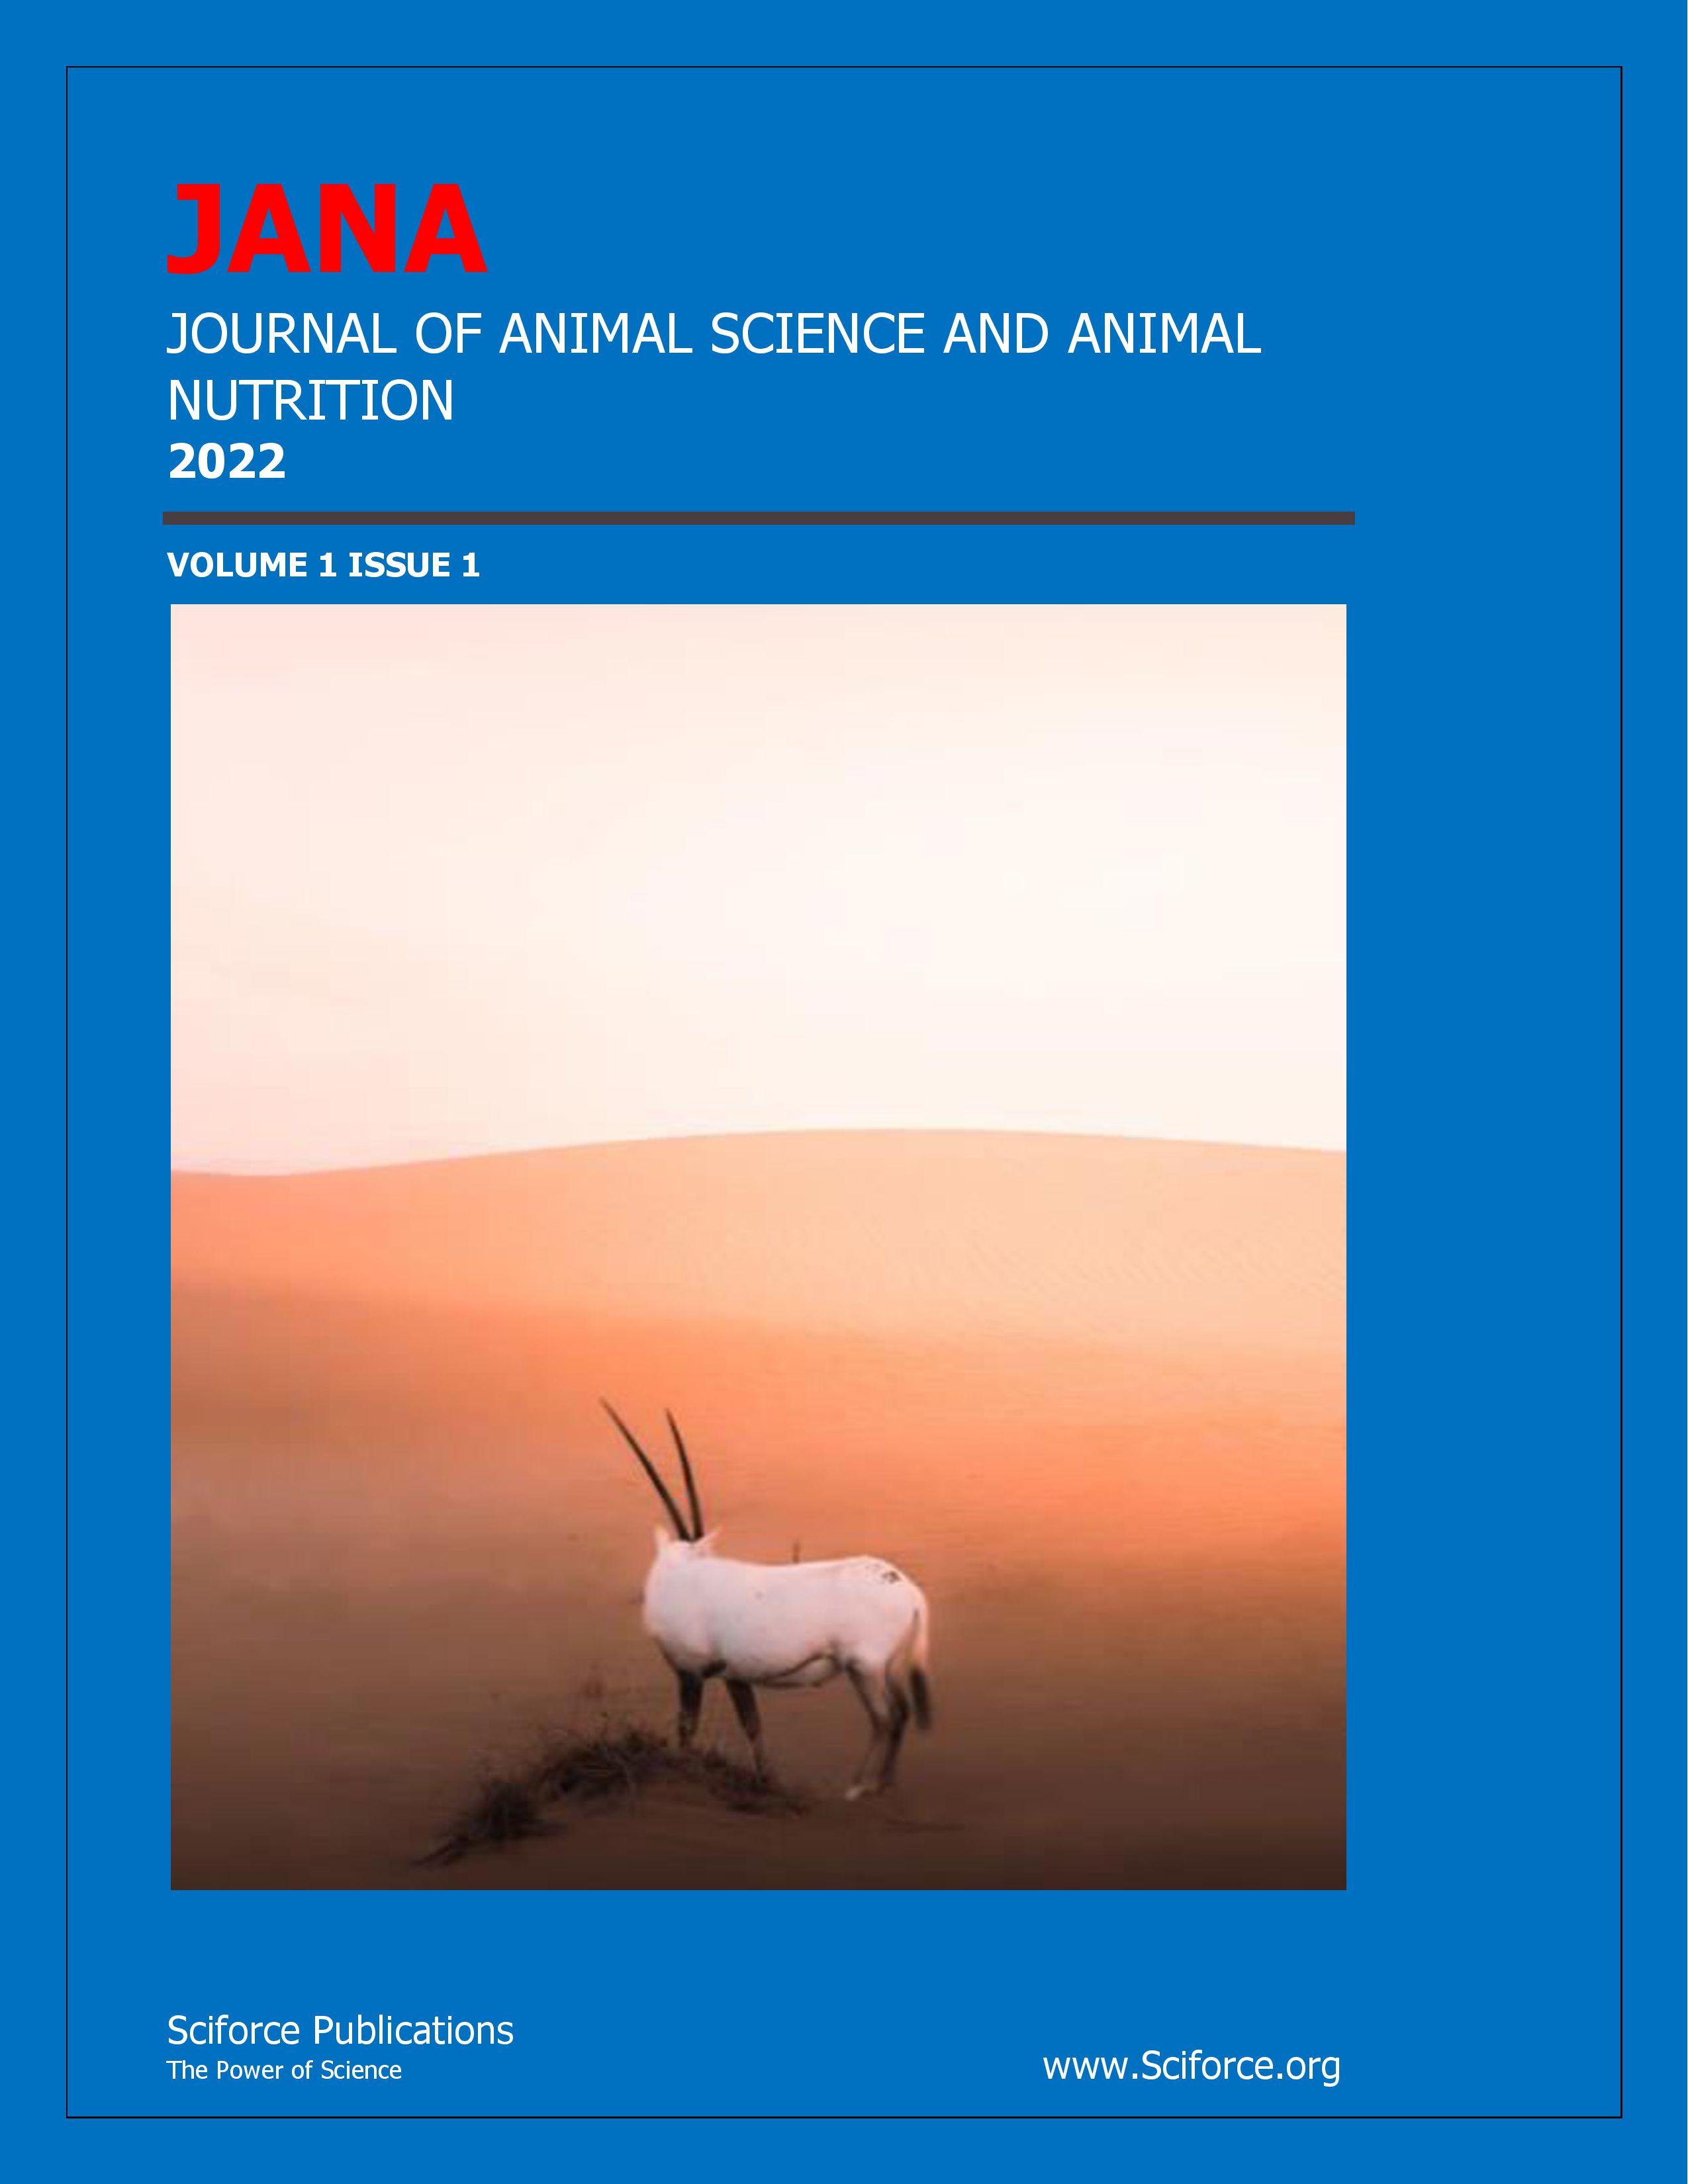 Journal of Animal Nutrition and Animal Sciences